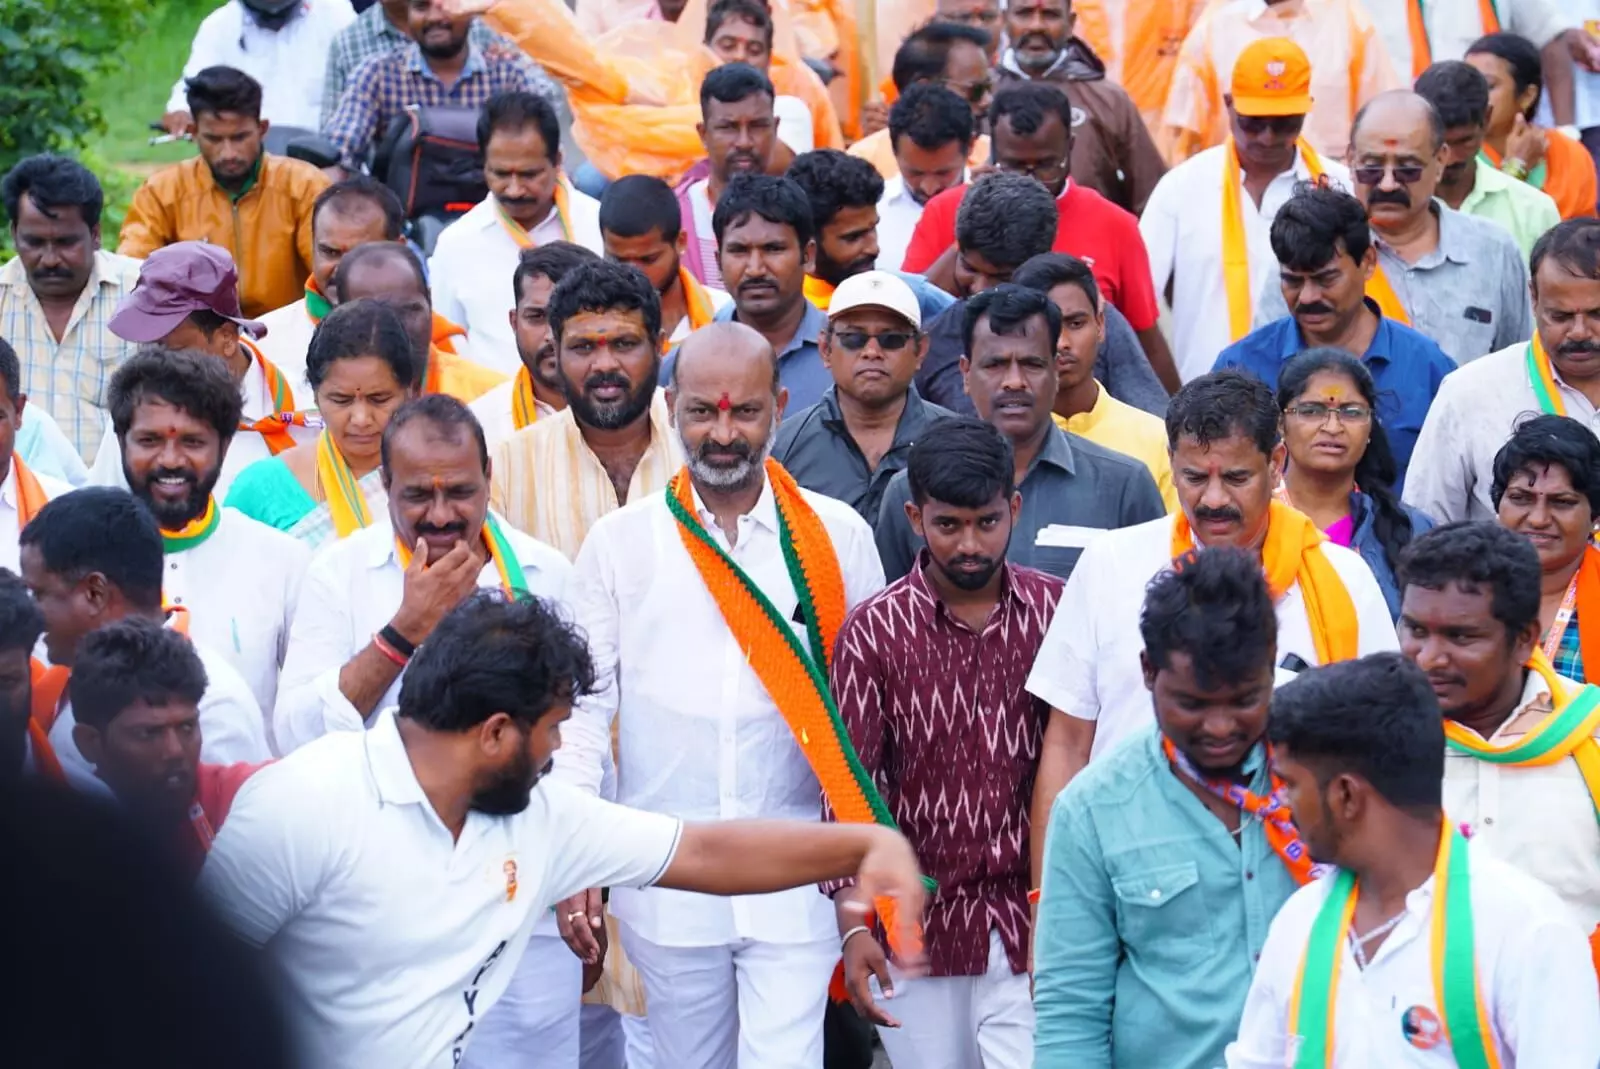 Bandi Sanjay arrives in Munugode, makes first poll pitch